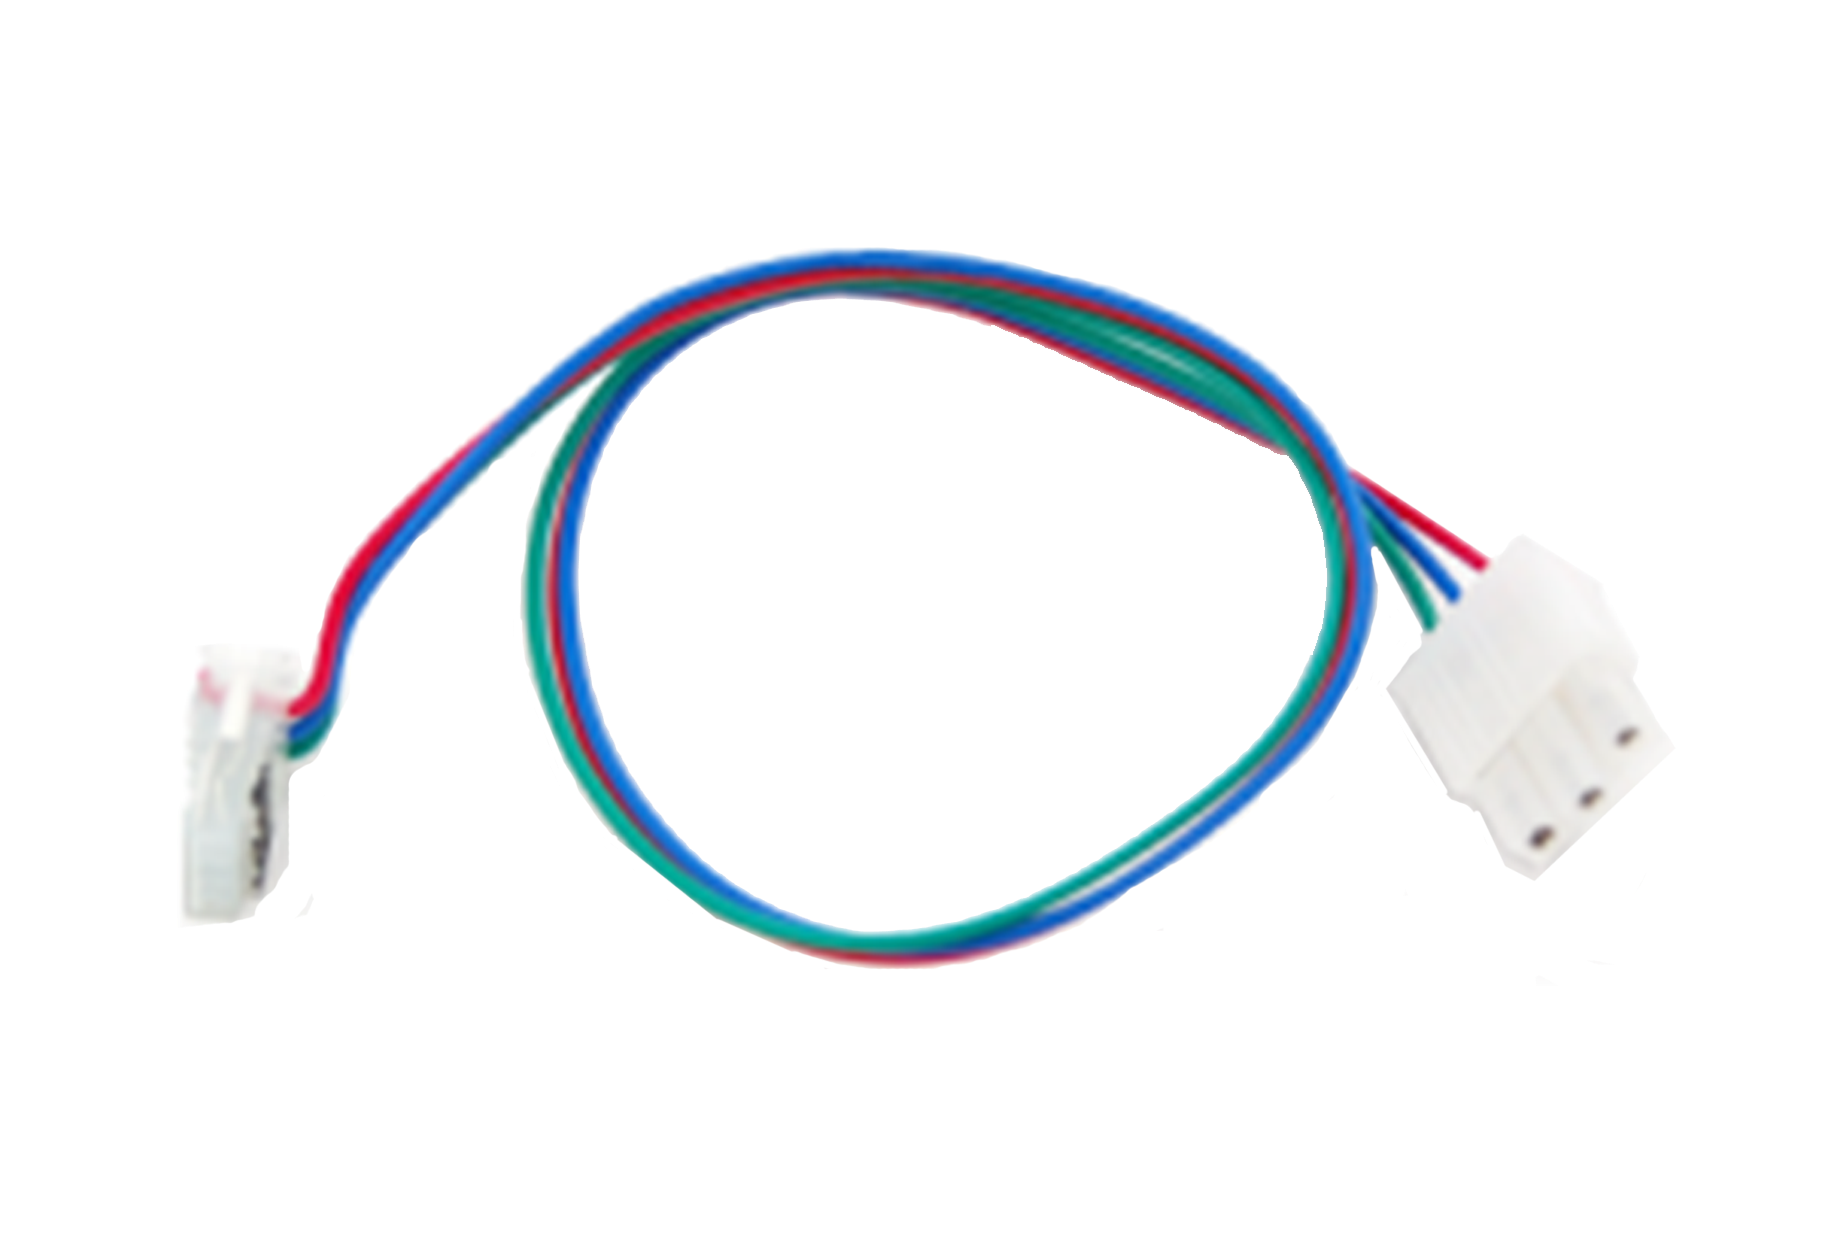 Usb Cable (2410x1233)